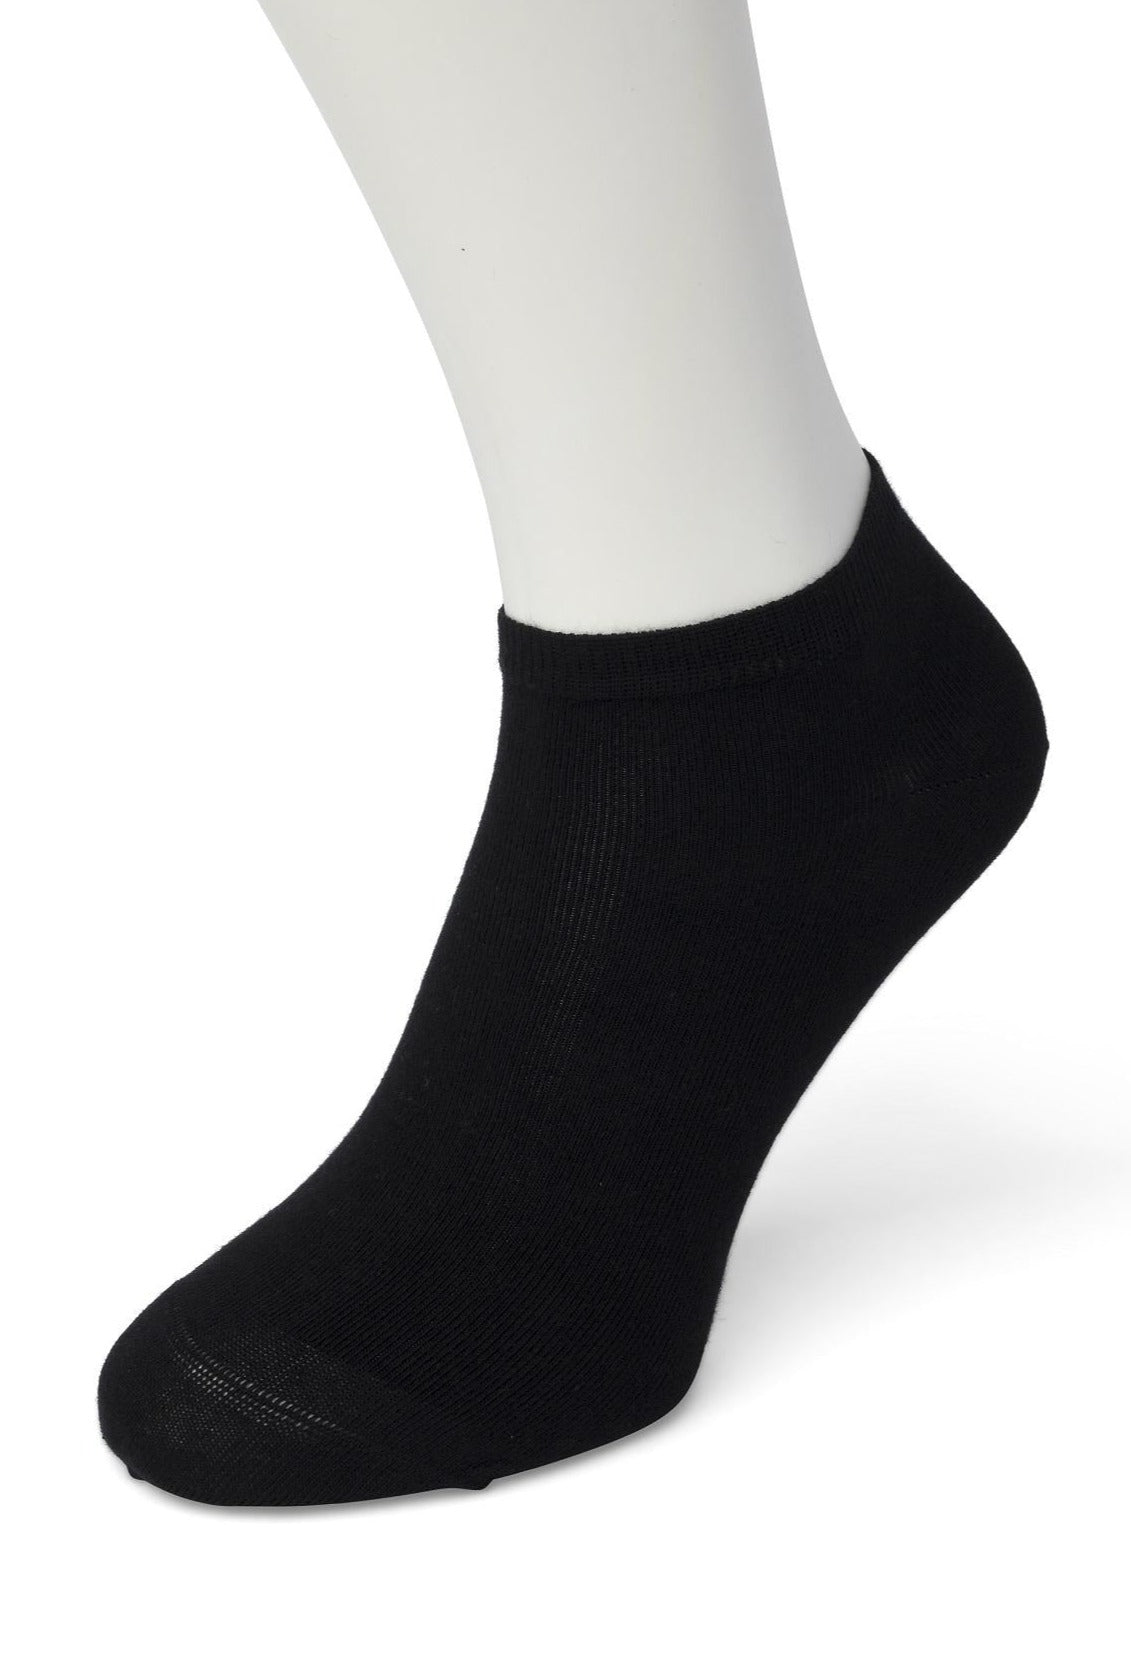 Bonnie Doon BD811001/BE812001/BD913401 Cotton Short Ankle Sock - Black Low rise cotton mix socks with flat toe seam and plain elasticated cuff. 